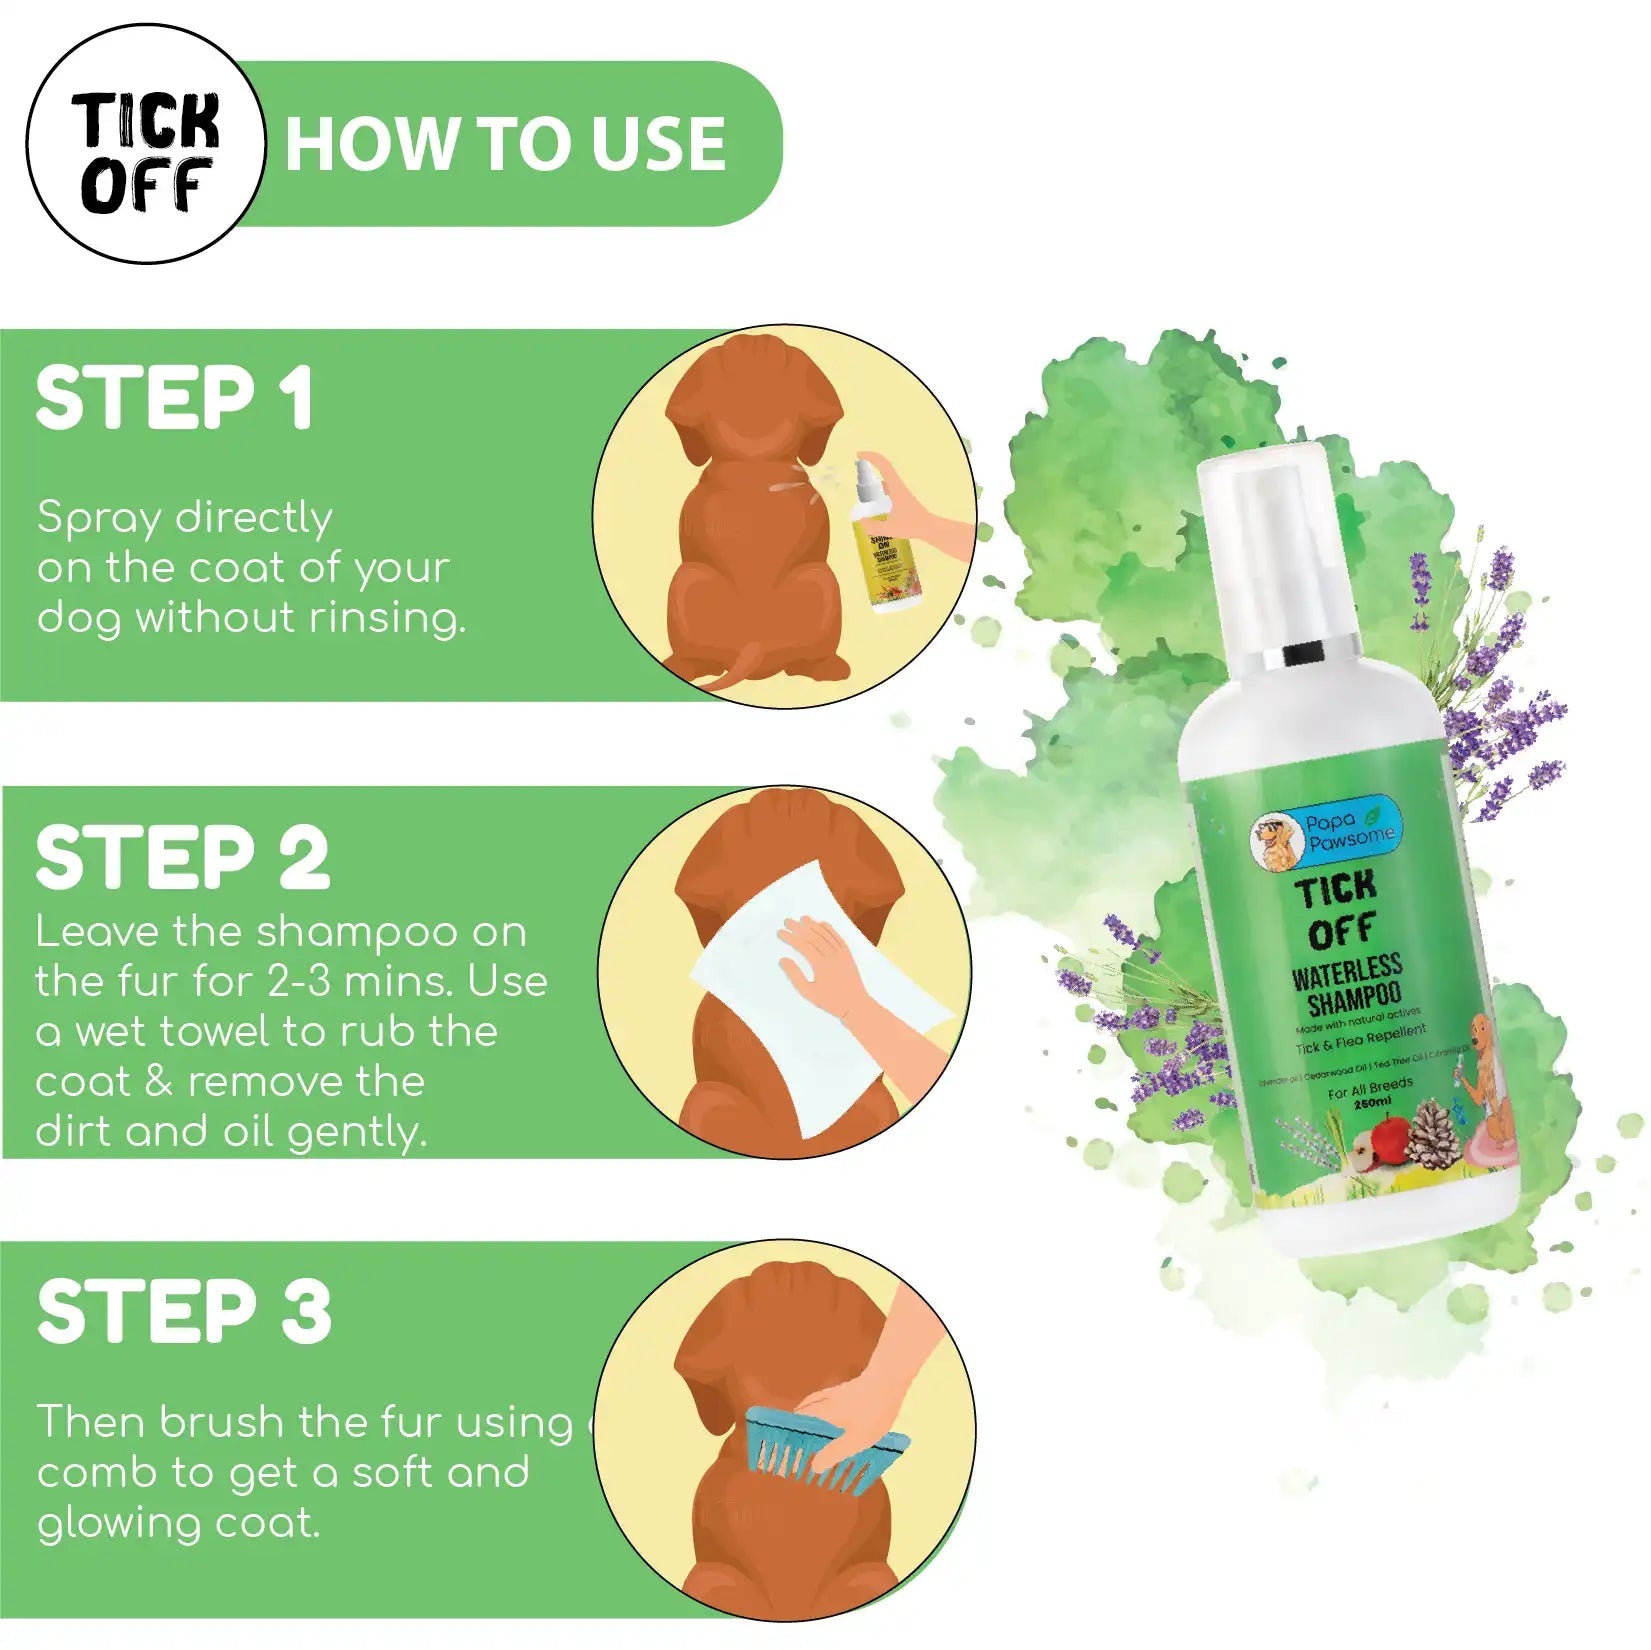 Application instructions for dog waterless shampoo: Spray directly on the coat, Leave on for 2-3 minutes, use a damp towel to remove dirt and oil gently